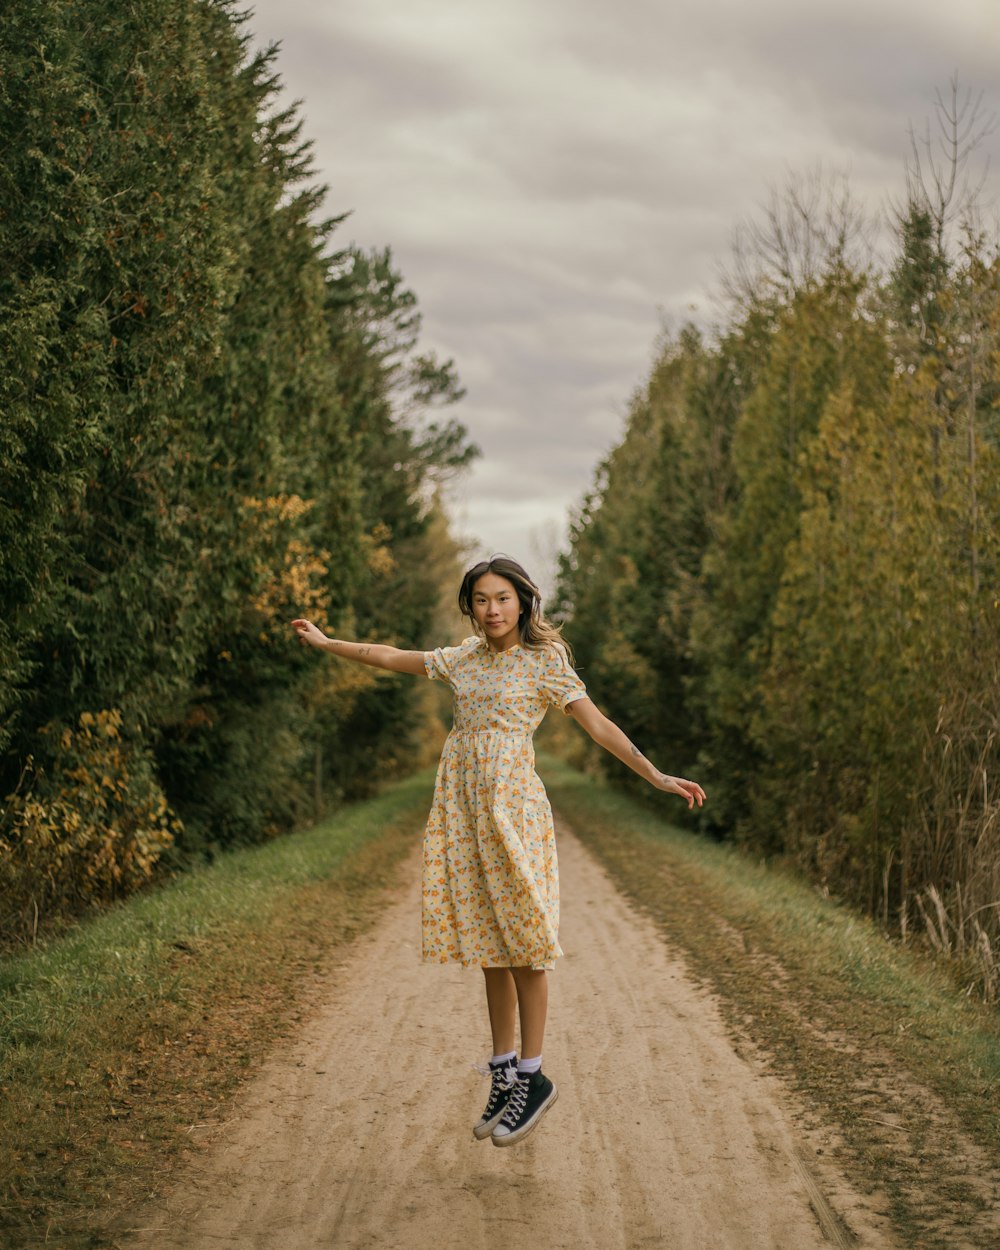 a woman in a yellow dress jumping in the air